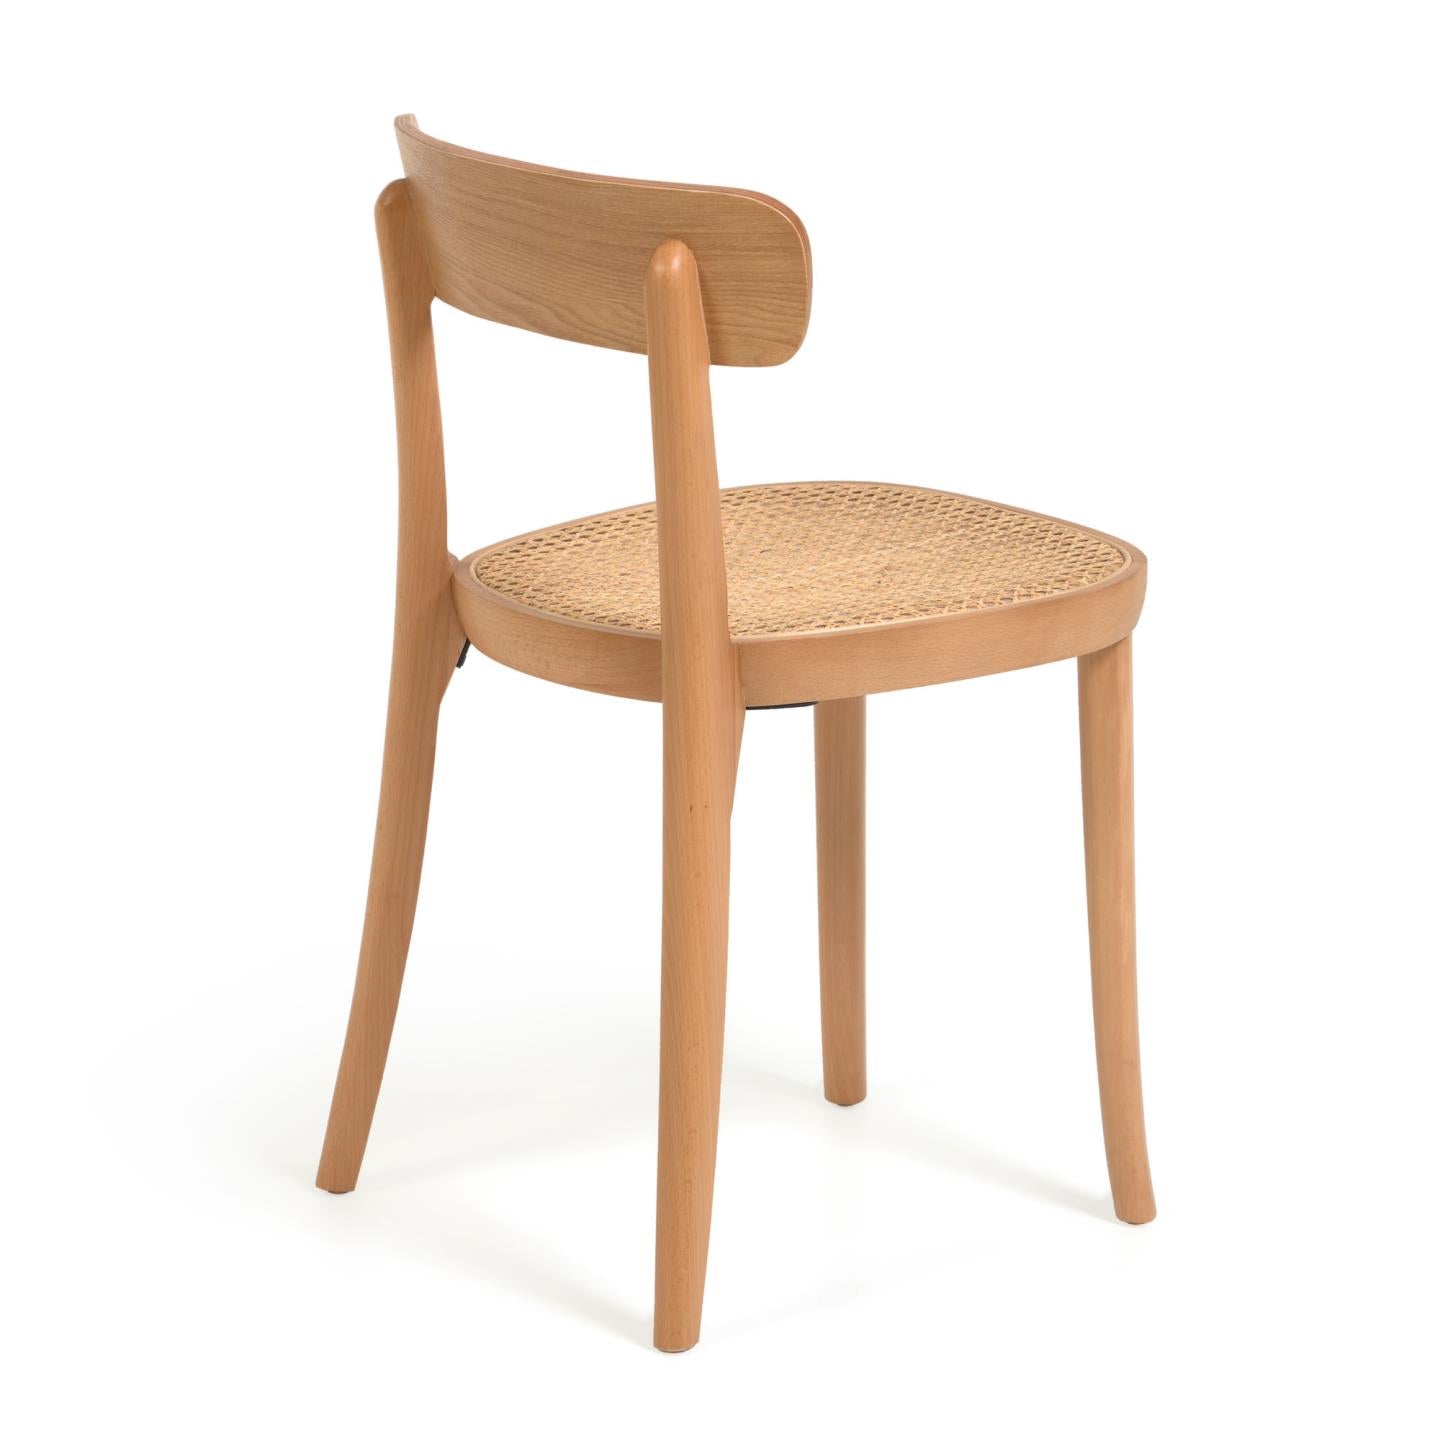 Romane chair in solid beech with natural finish, ash veneer and rattan